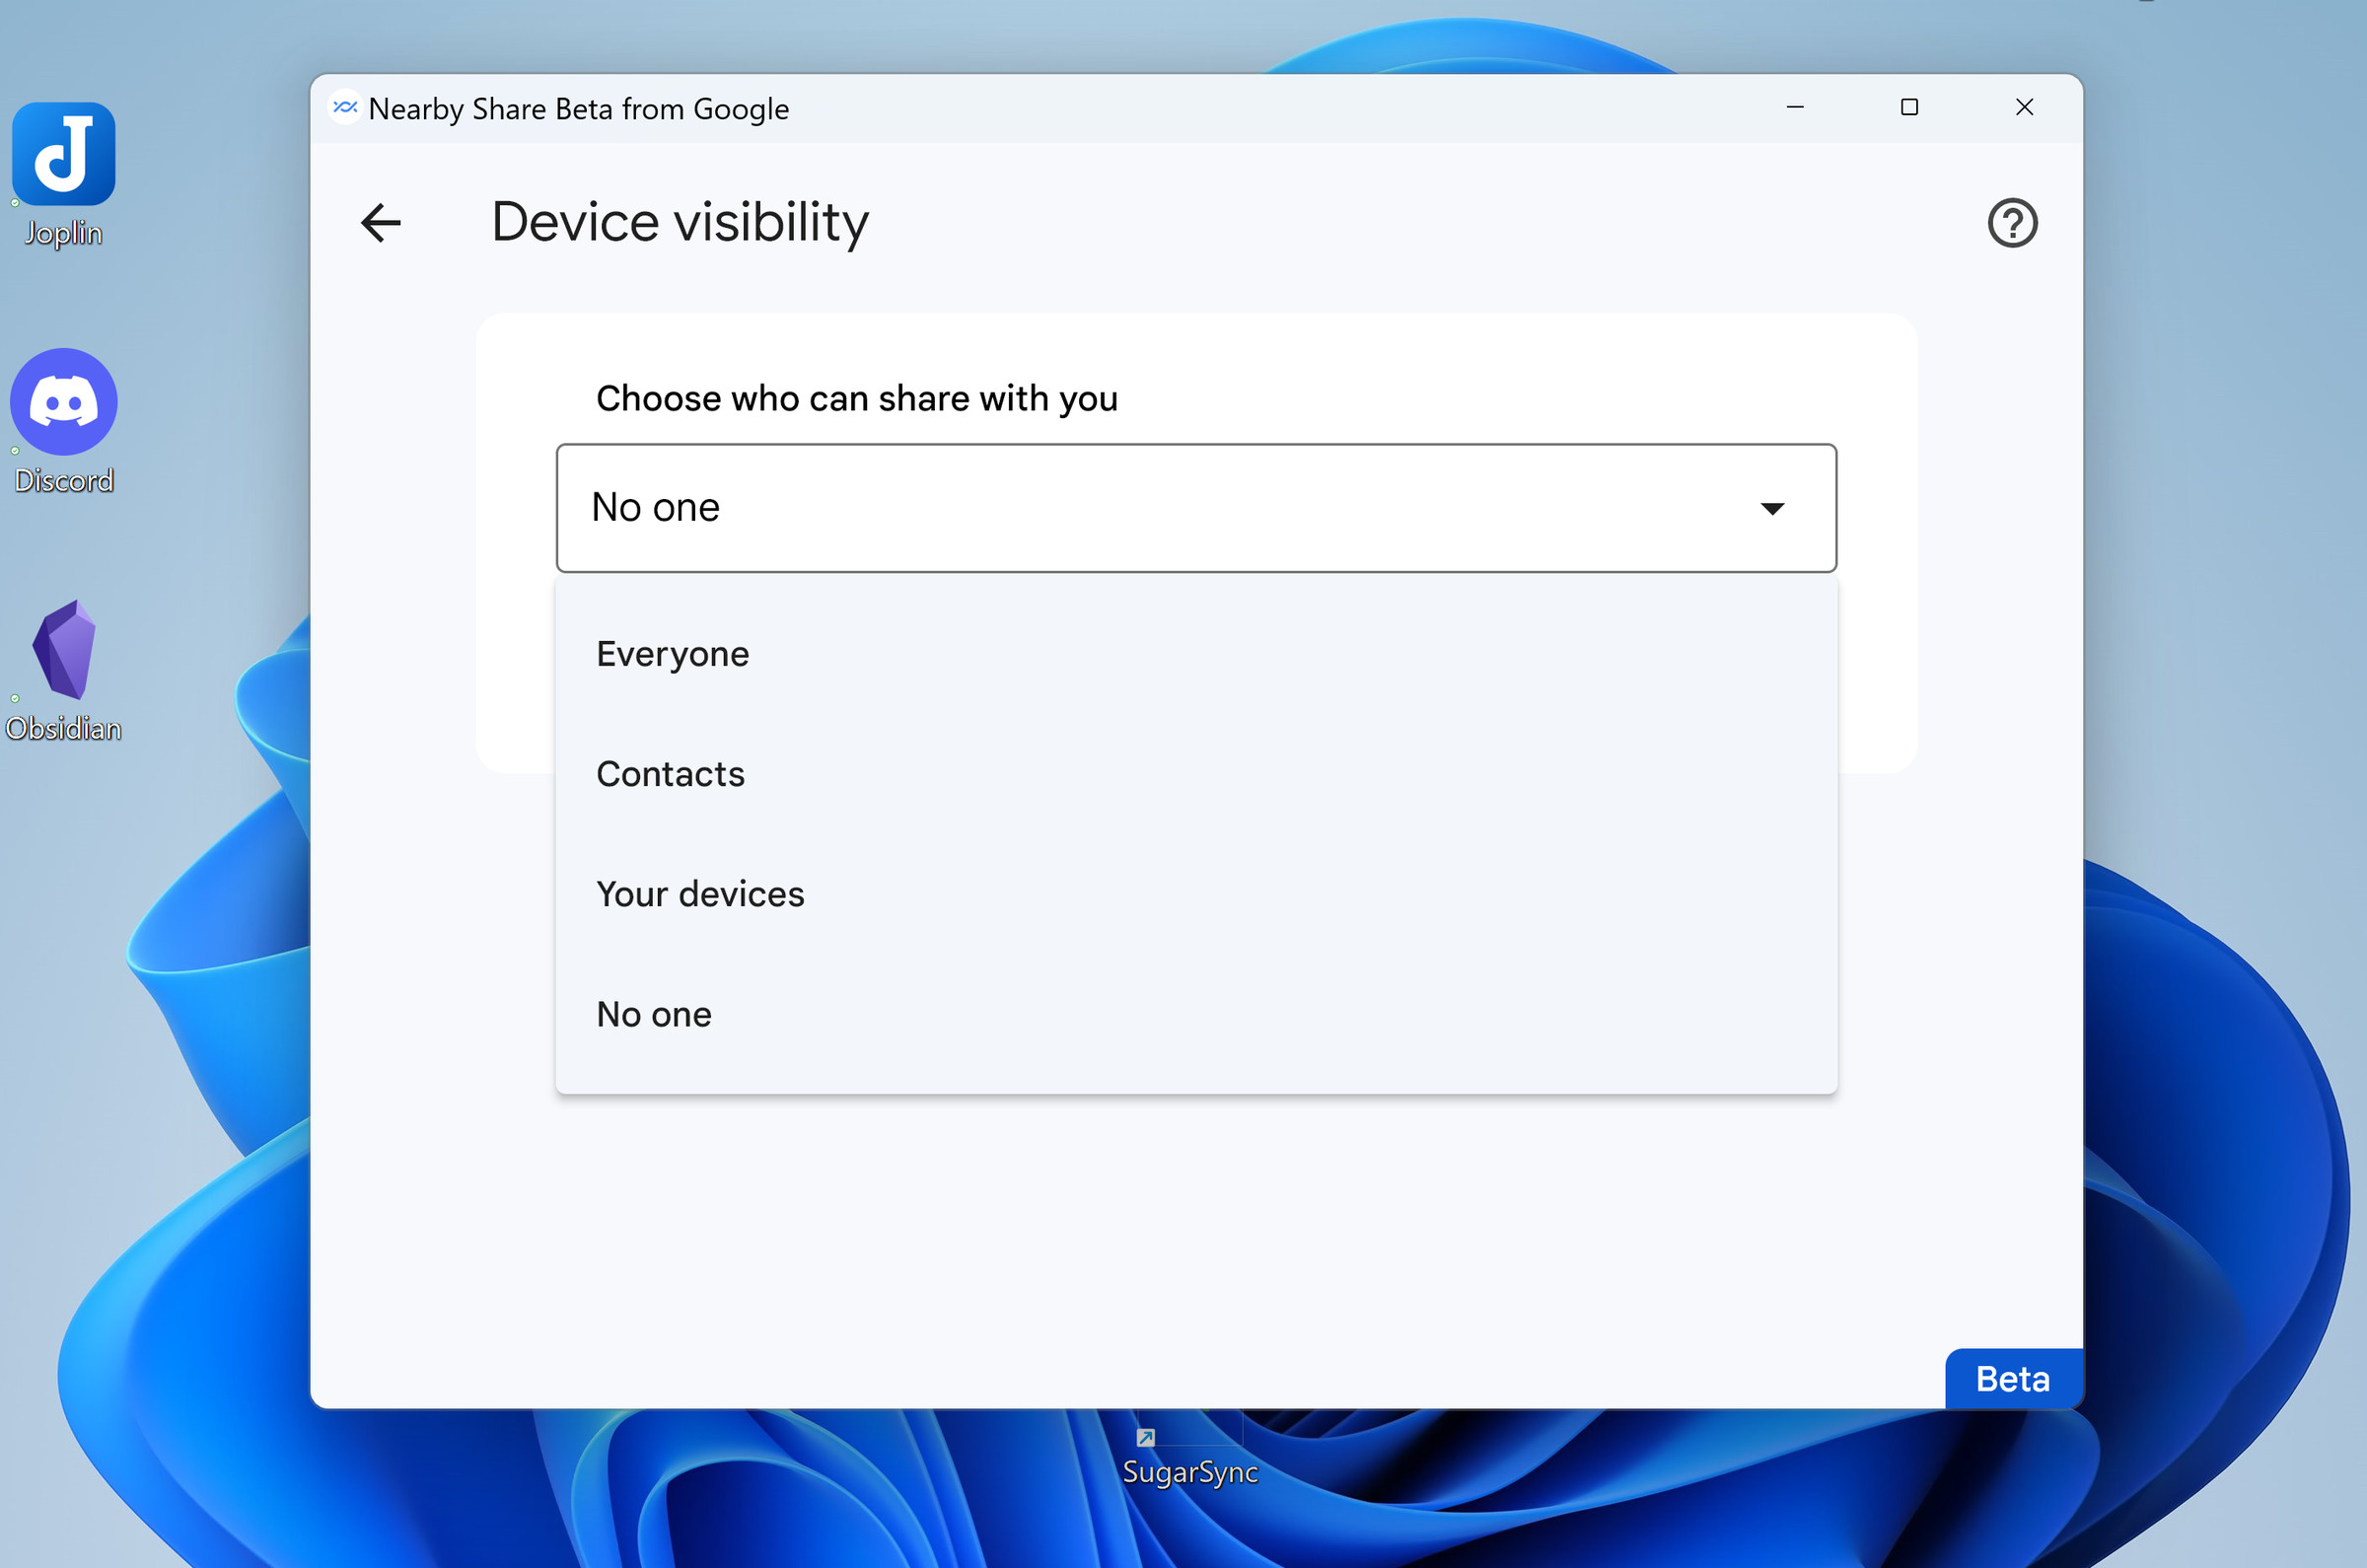 Device visibility menu with drop-down menu listing: Everyone, Contacts, Your devices, and No one.